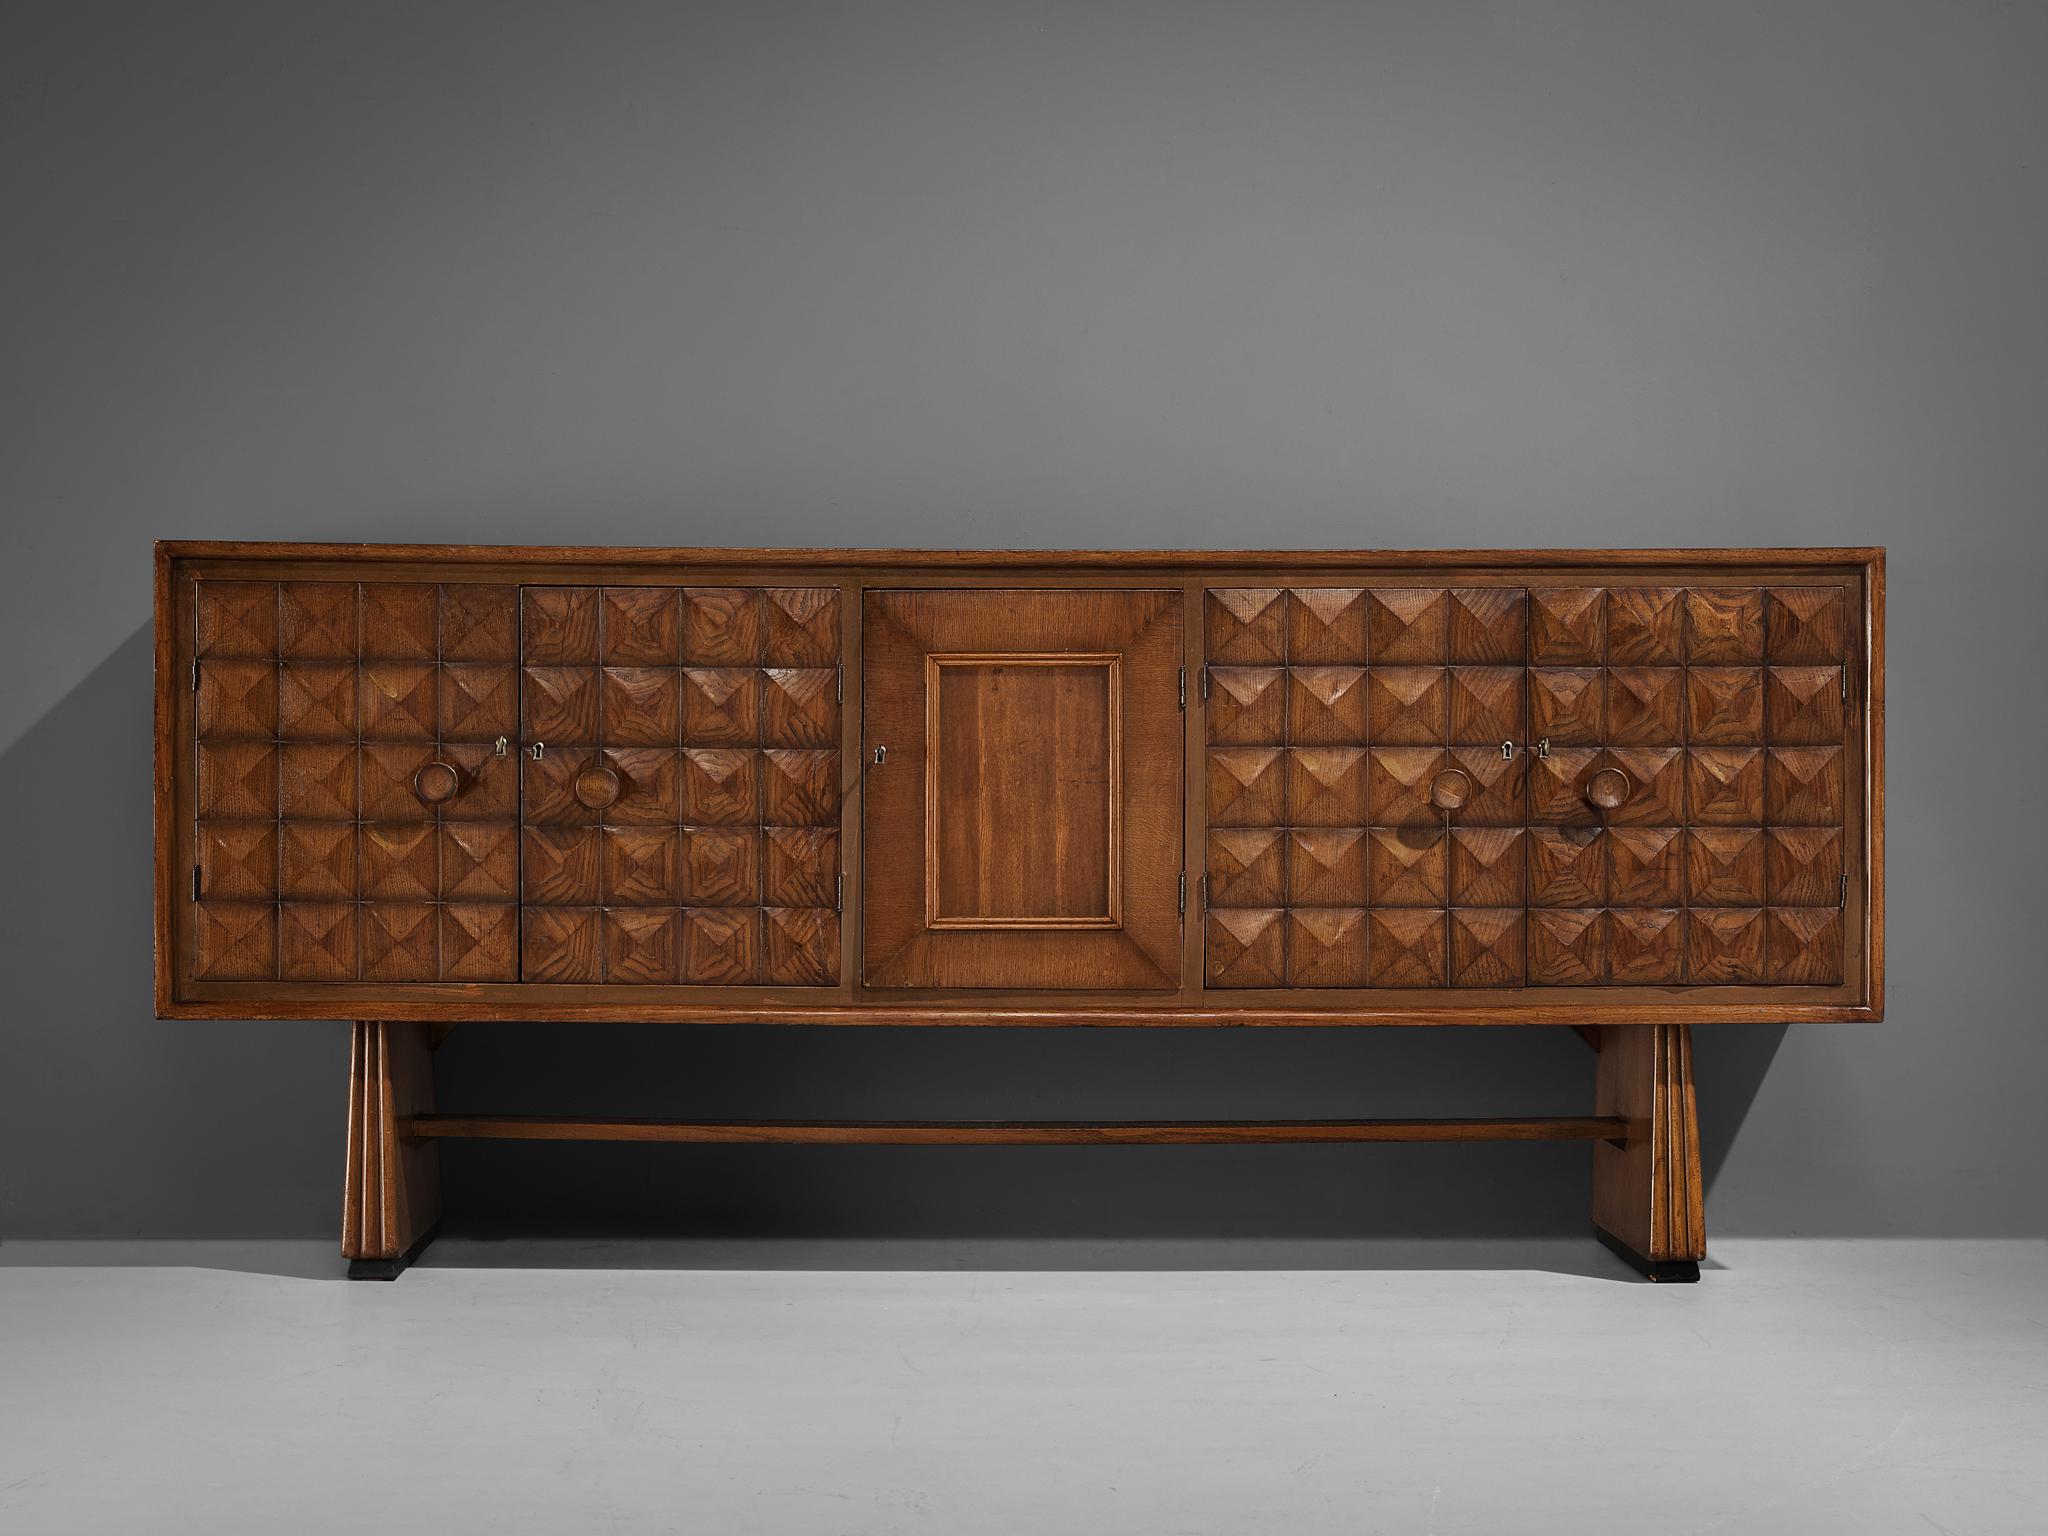 Mid-20th Century Italian Sideboard with Architectural and Decorative Elements